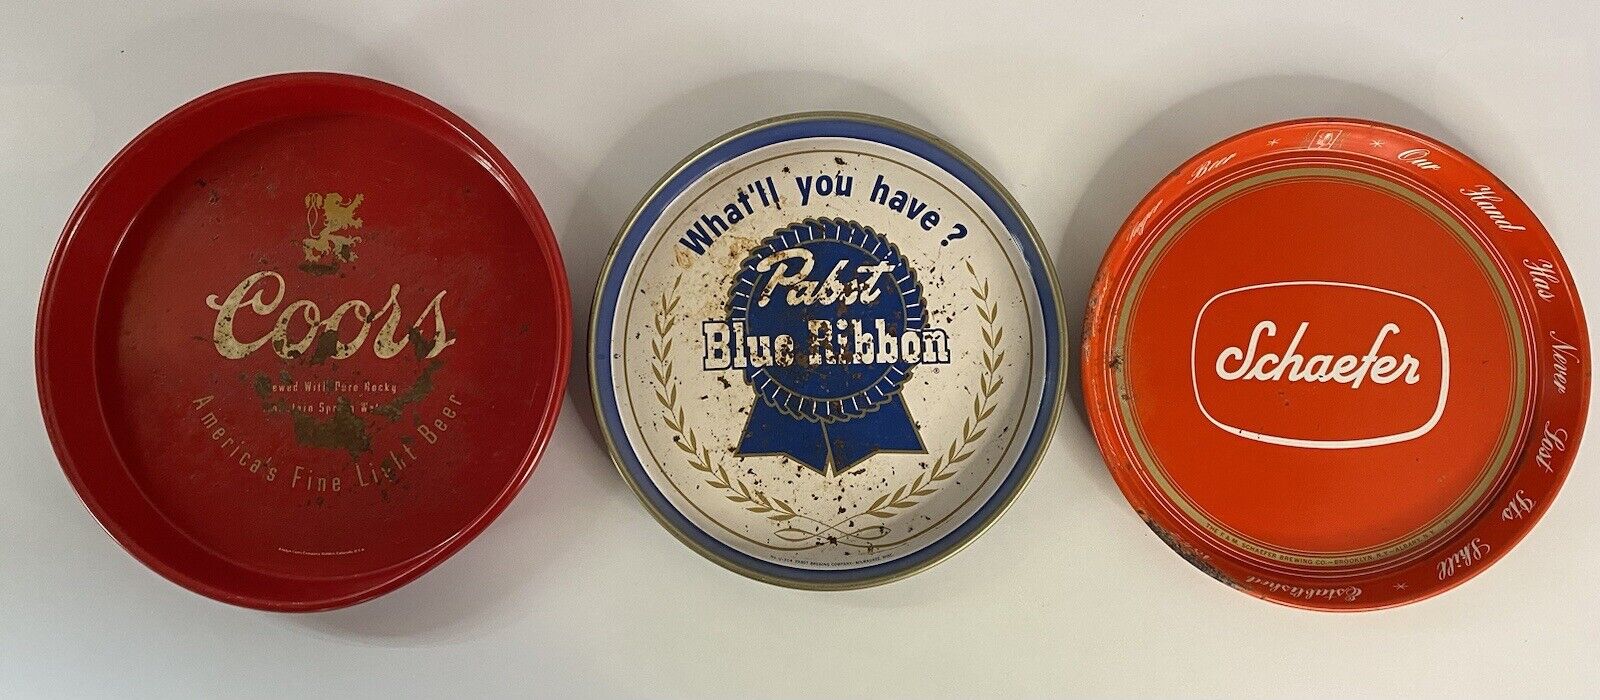 Vintage COORS SCHAEFER PABST BLUE RIBBON Round Beer Serving Tray Lot Of 3